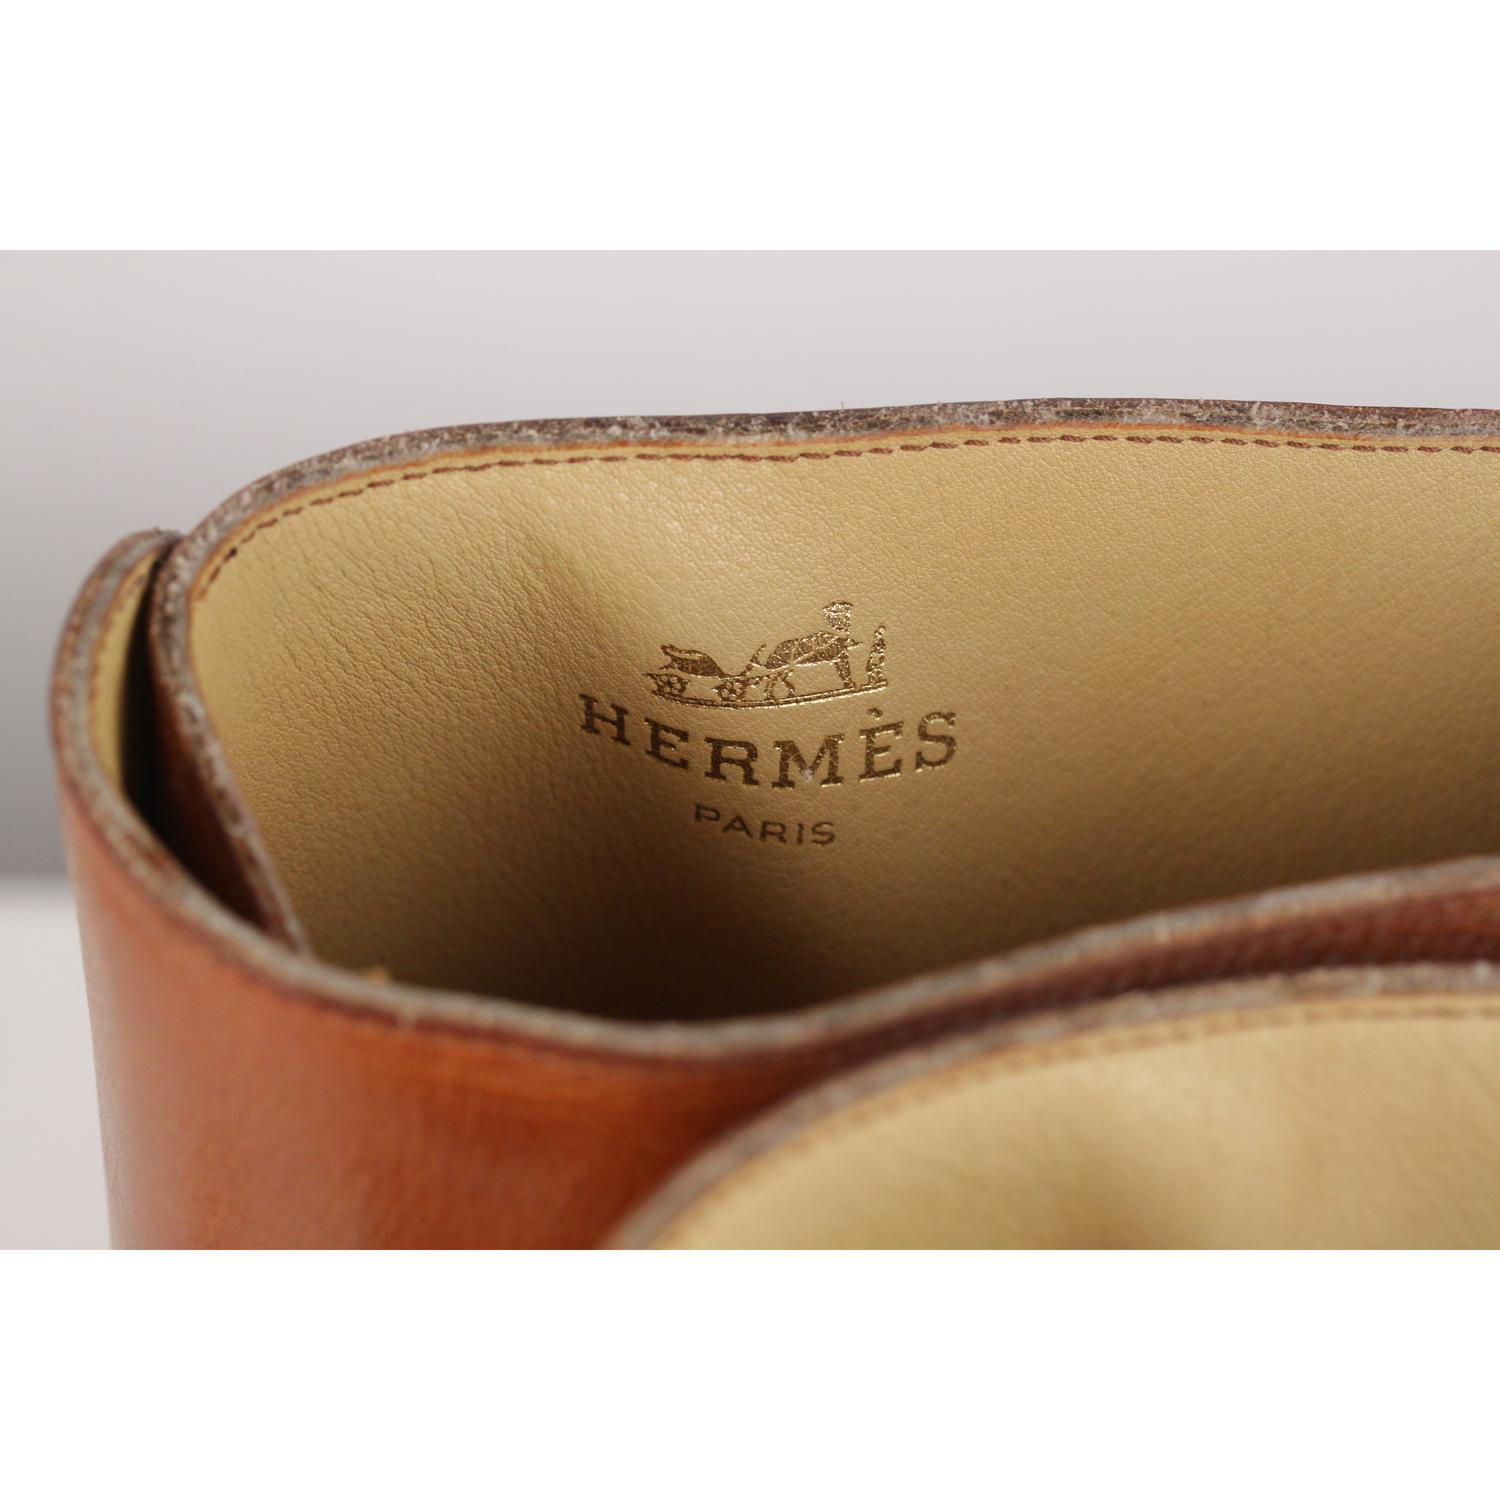 Hermes Tan Leather Men Buckle Mid Calf Boots Size 41 2